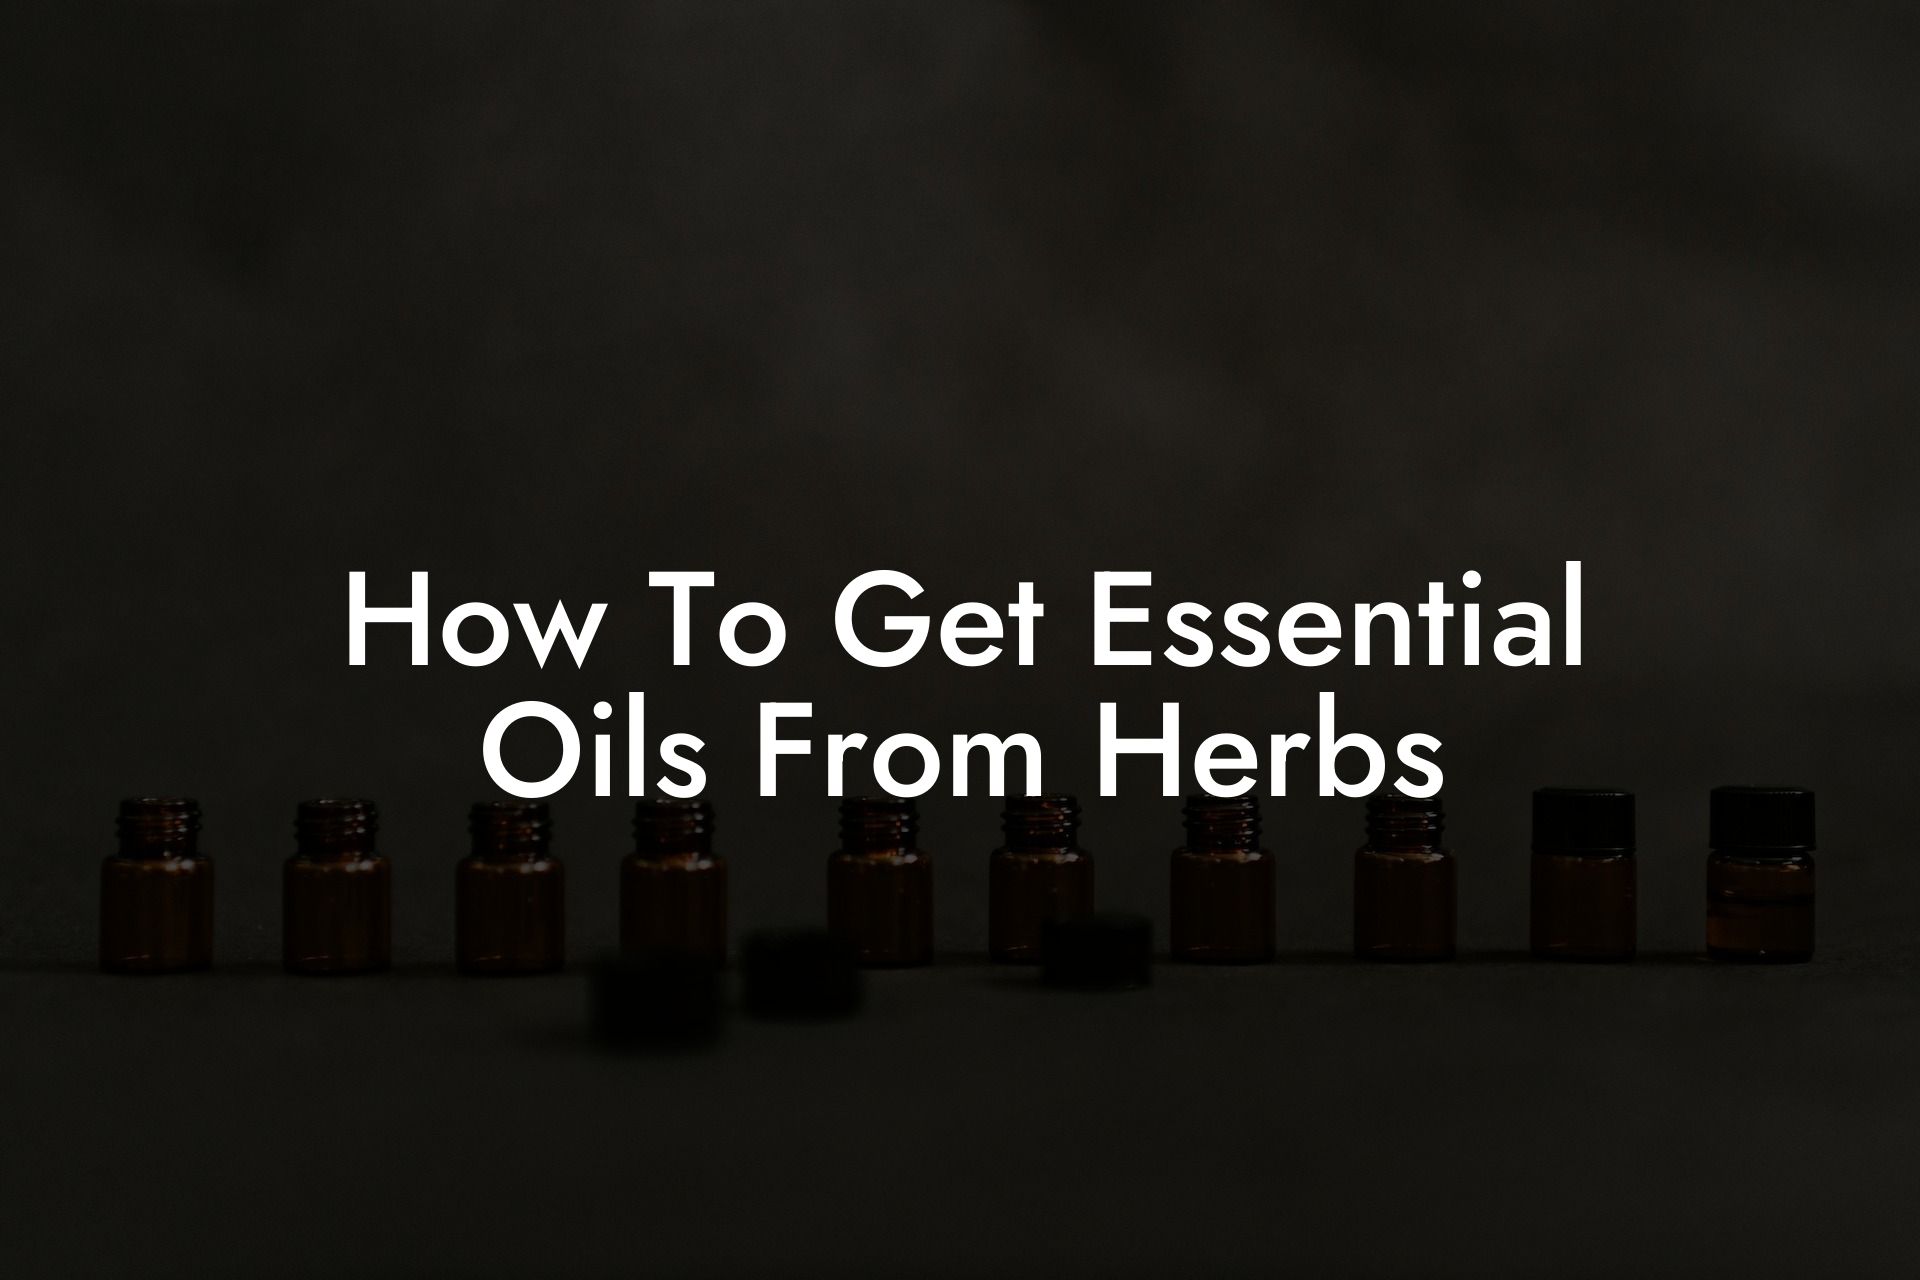 How To Get Essential Oils From Herbs